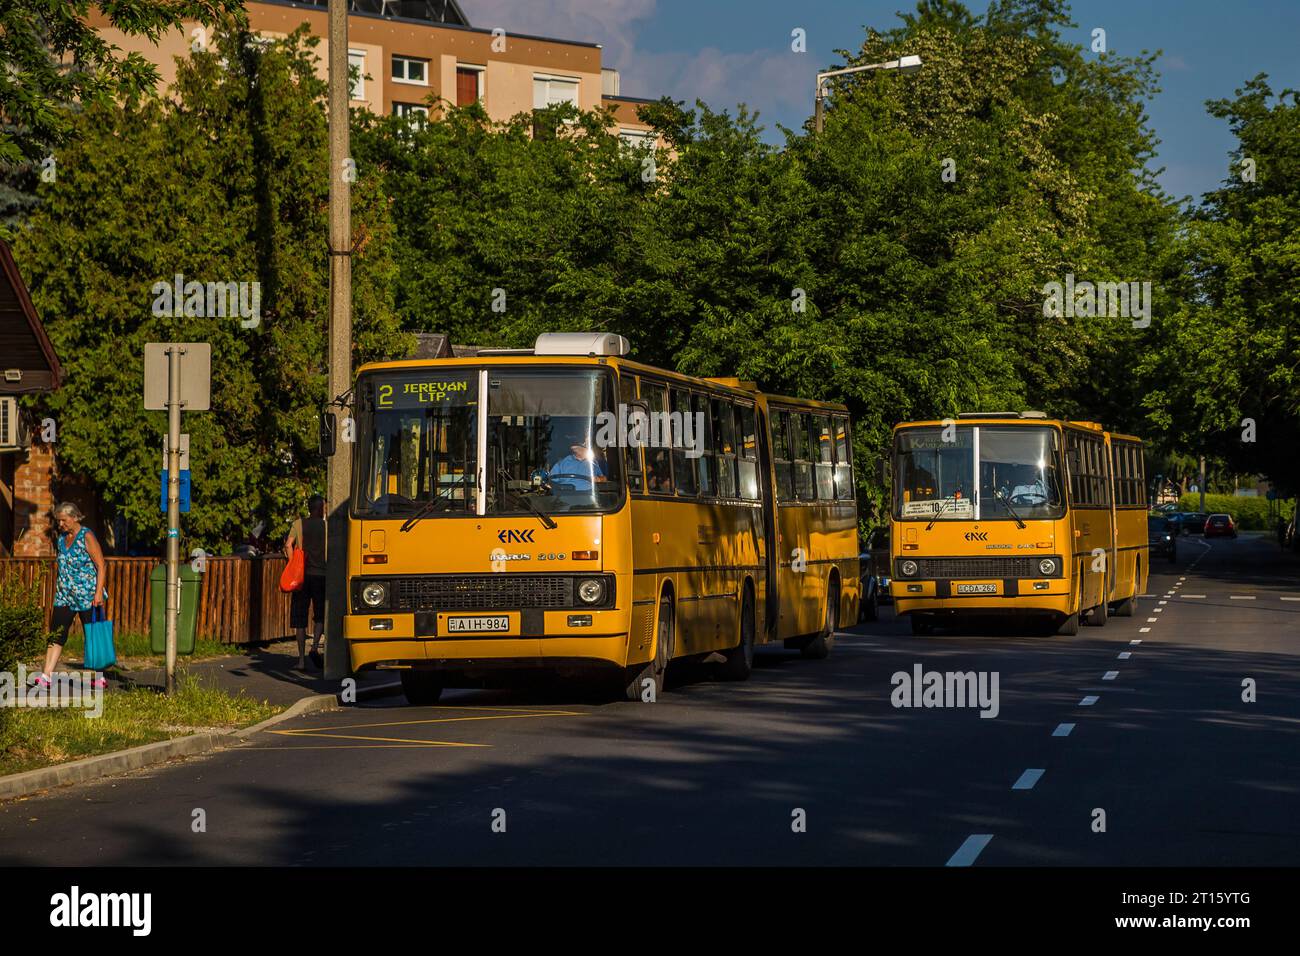 Ikarus has some news in sight, including e-bus chassis and articulated model